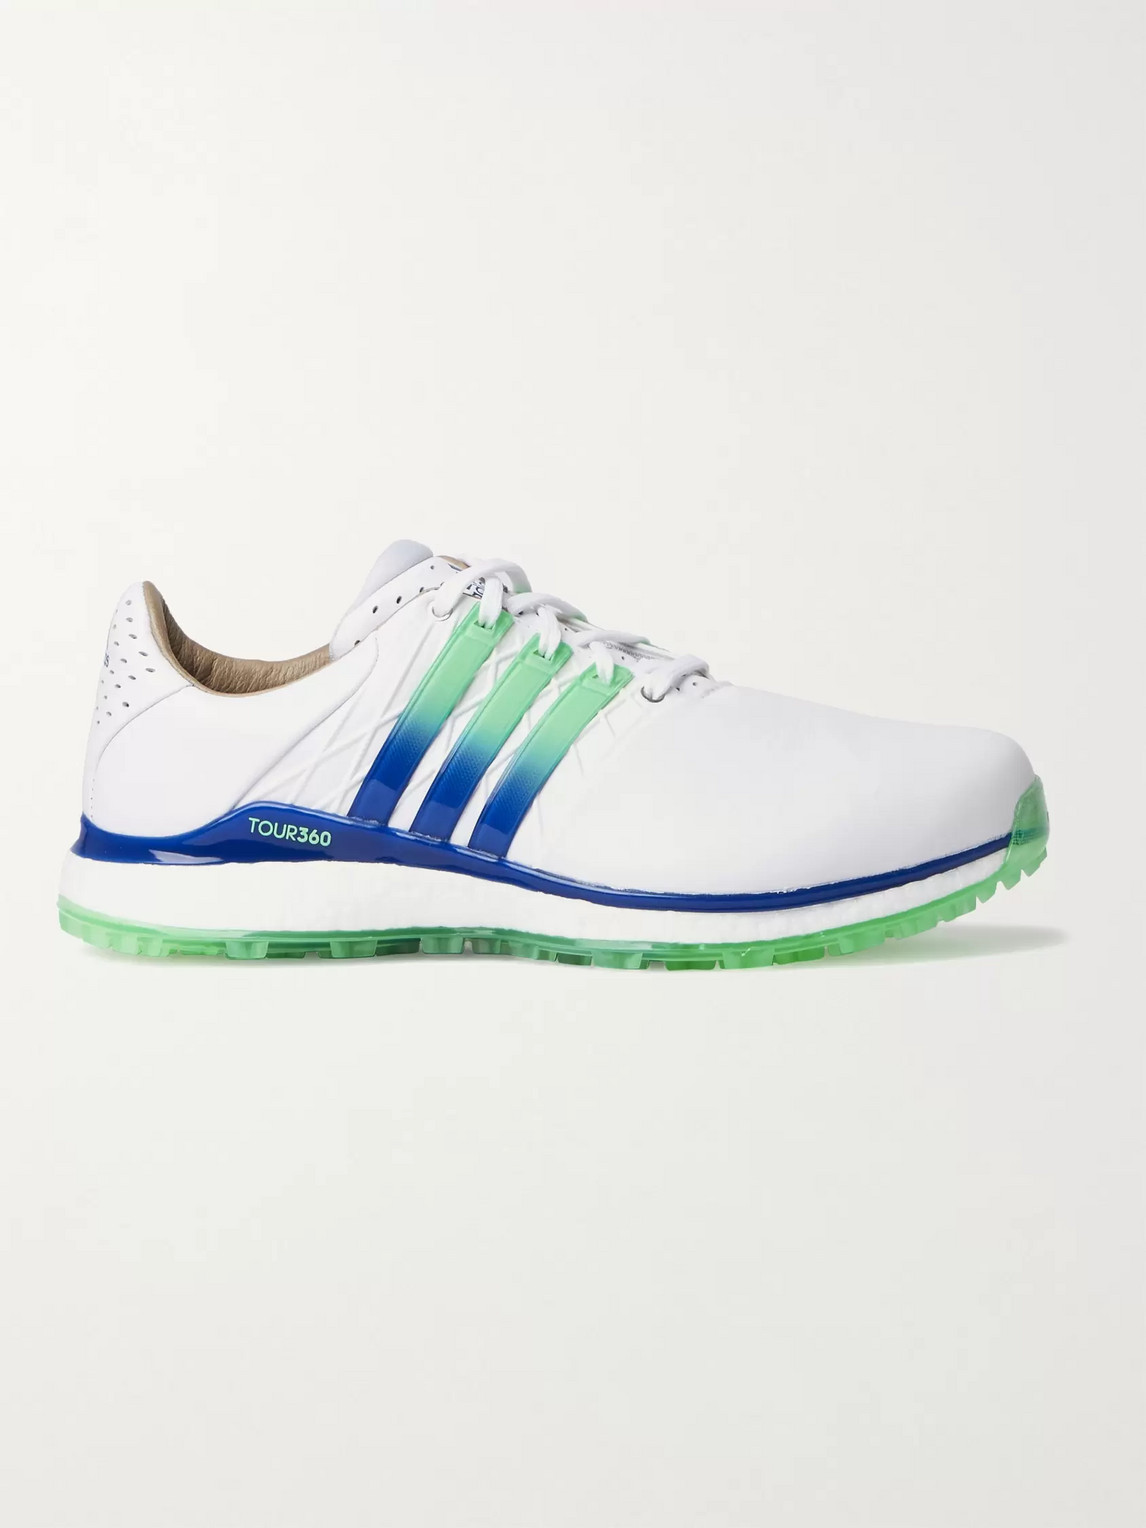 Adidas Golf Tour360 Xt-sl 2.0 Wide-fit Leather Spikeless Golf Shoes In White